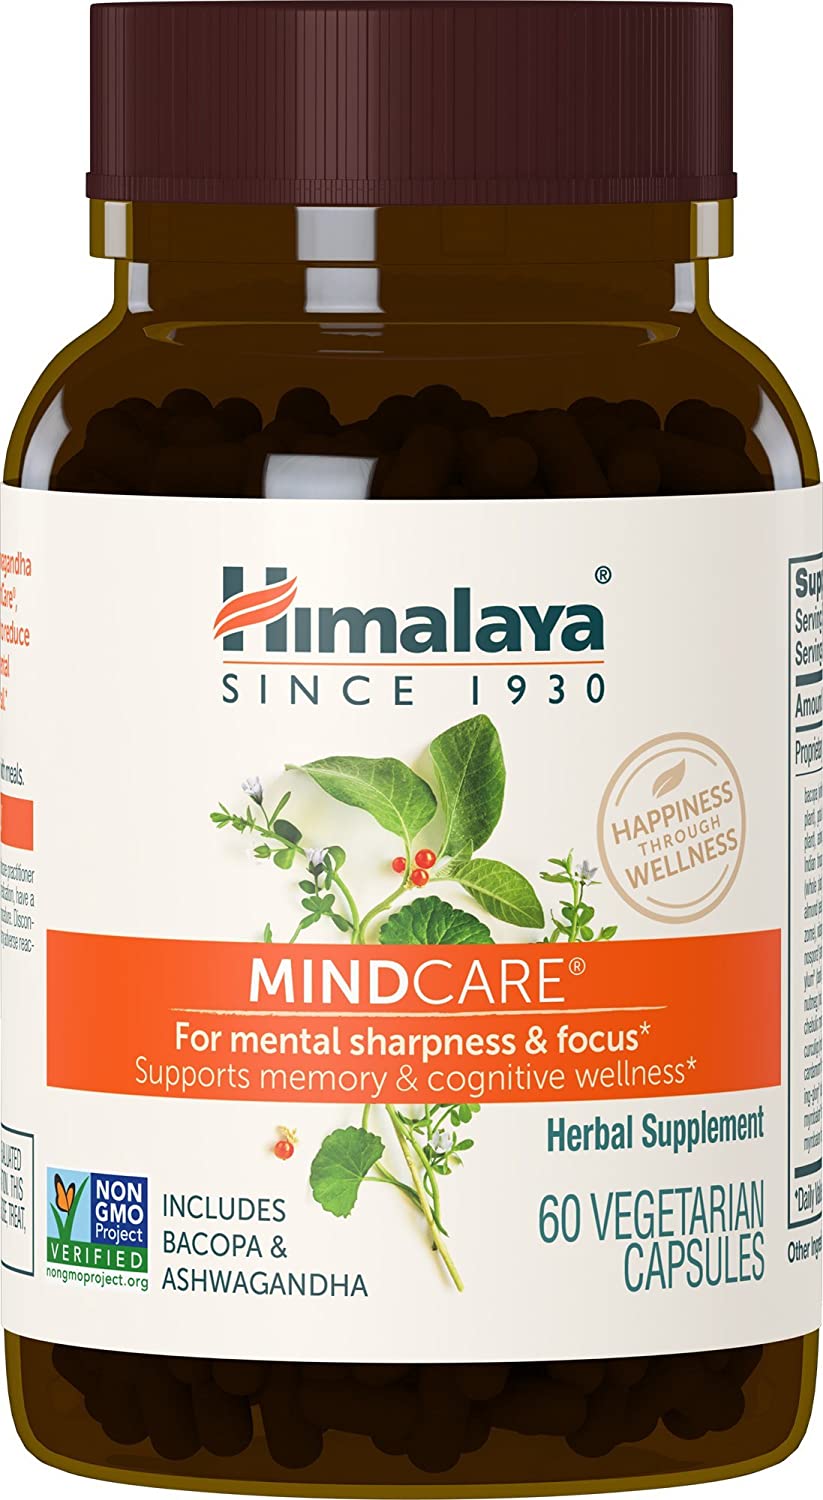 Himalaya MindCare: Elevate Mental Sharpness, Focus, and Memory with Nootropic Brain Supplement, 1170 mg, 60 Capsules